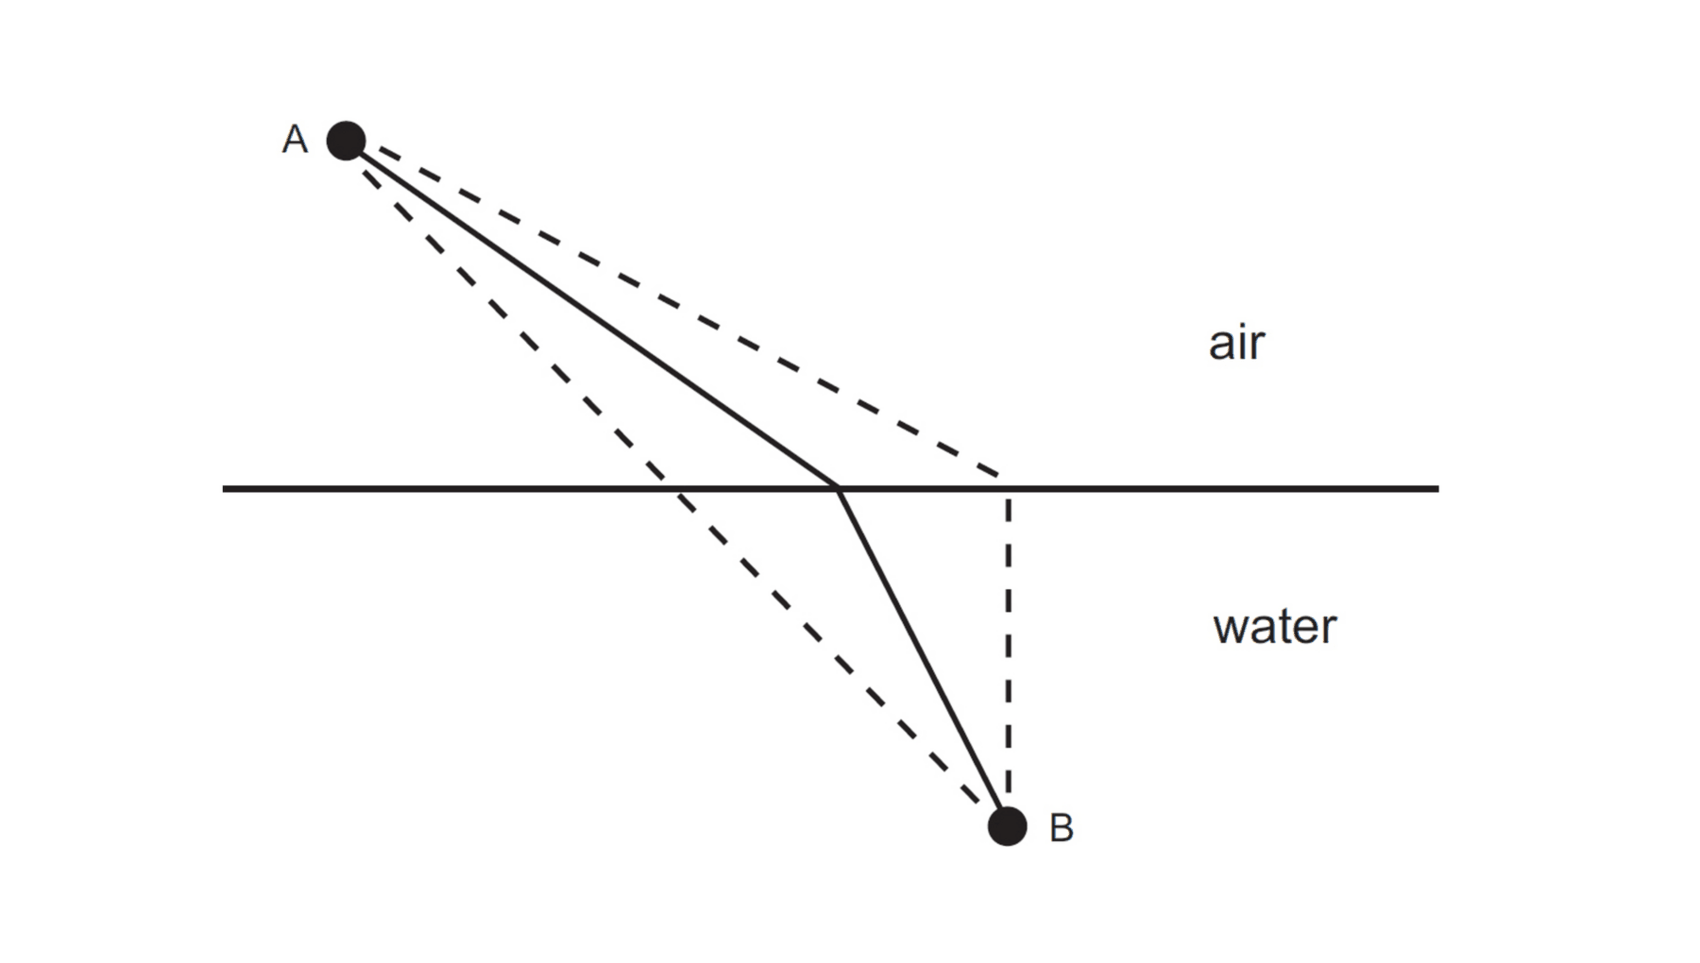 [Physics diagram: a ray of light refracting in air/water, compared to a hypothetical alternative path which is both slower in time and longer in space/distance (but with less length in water).]